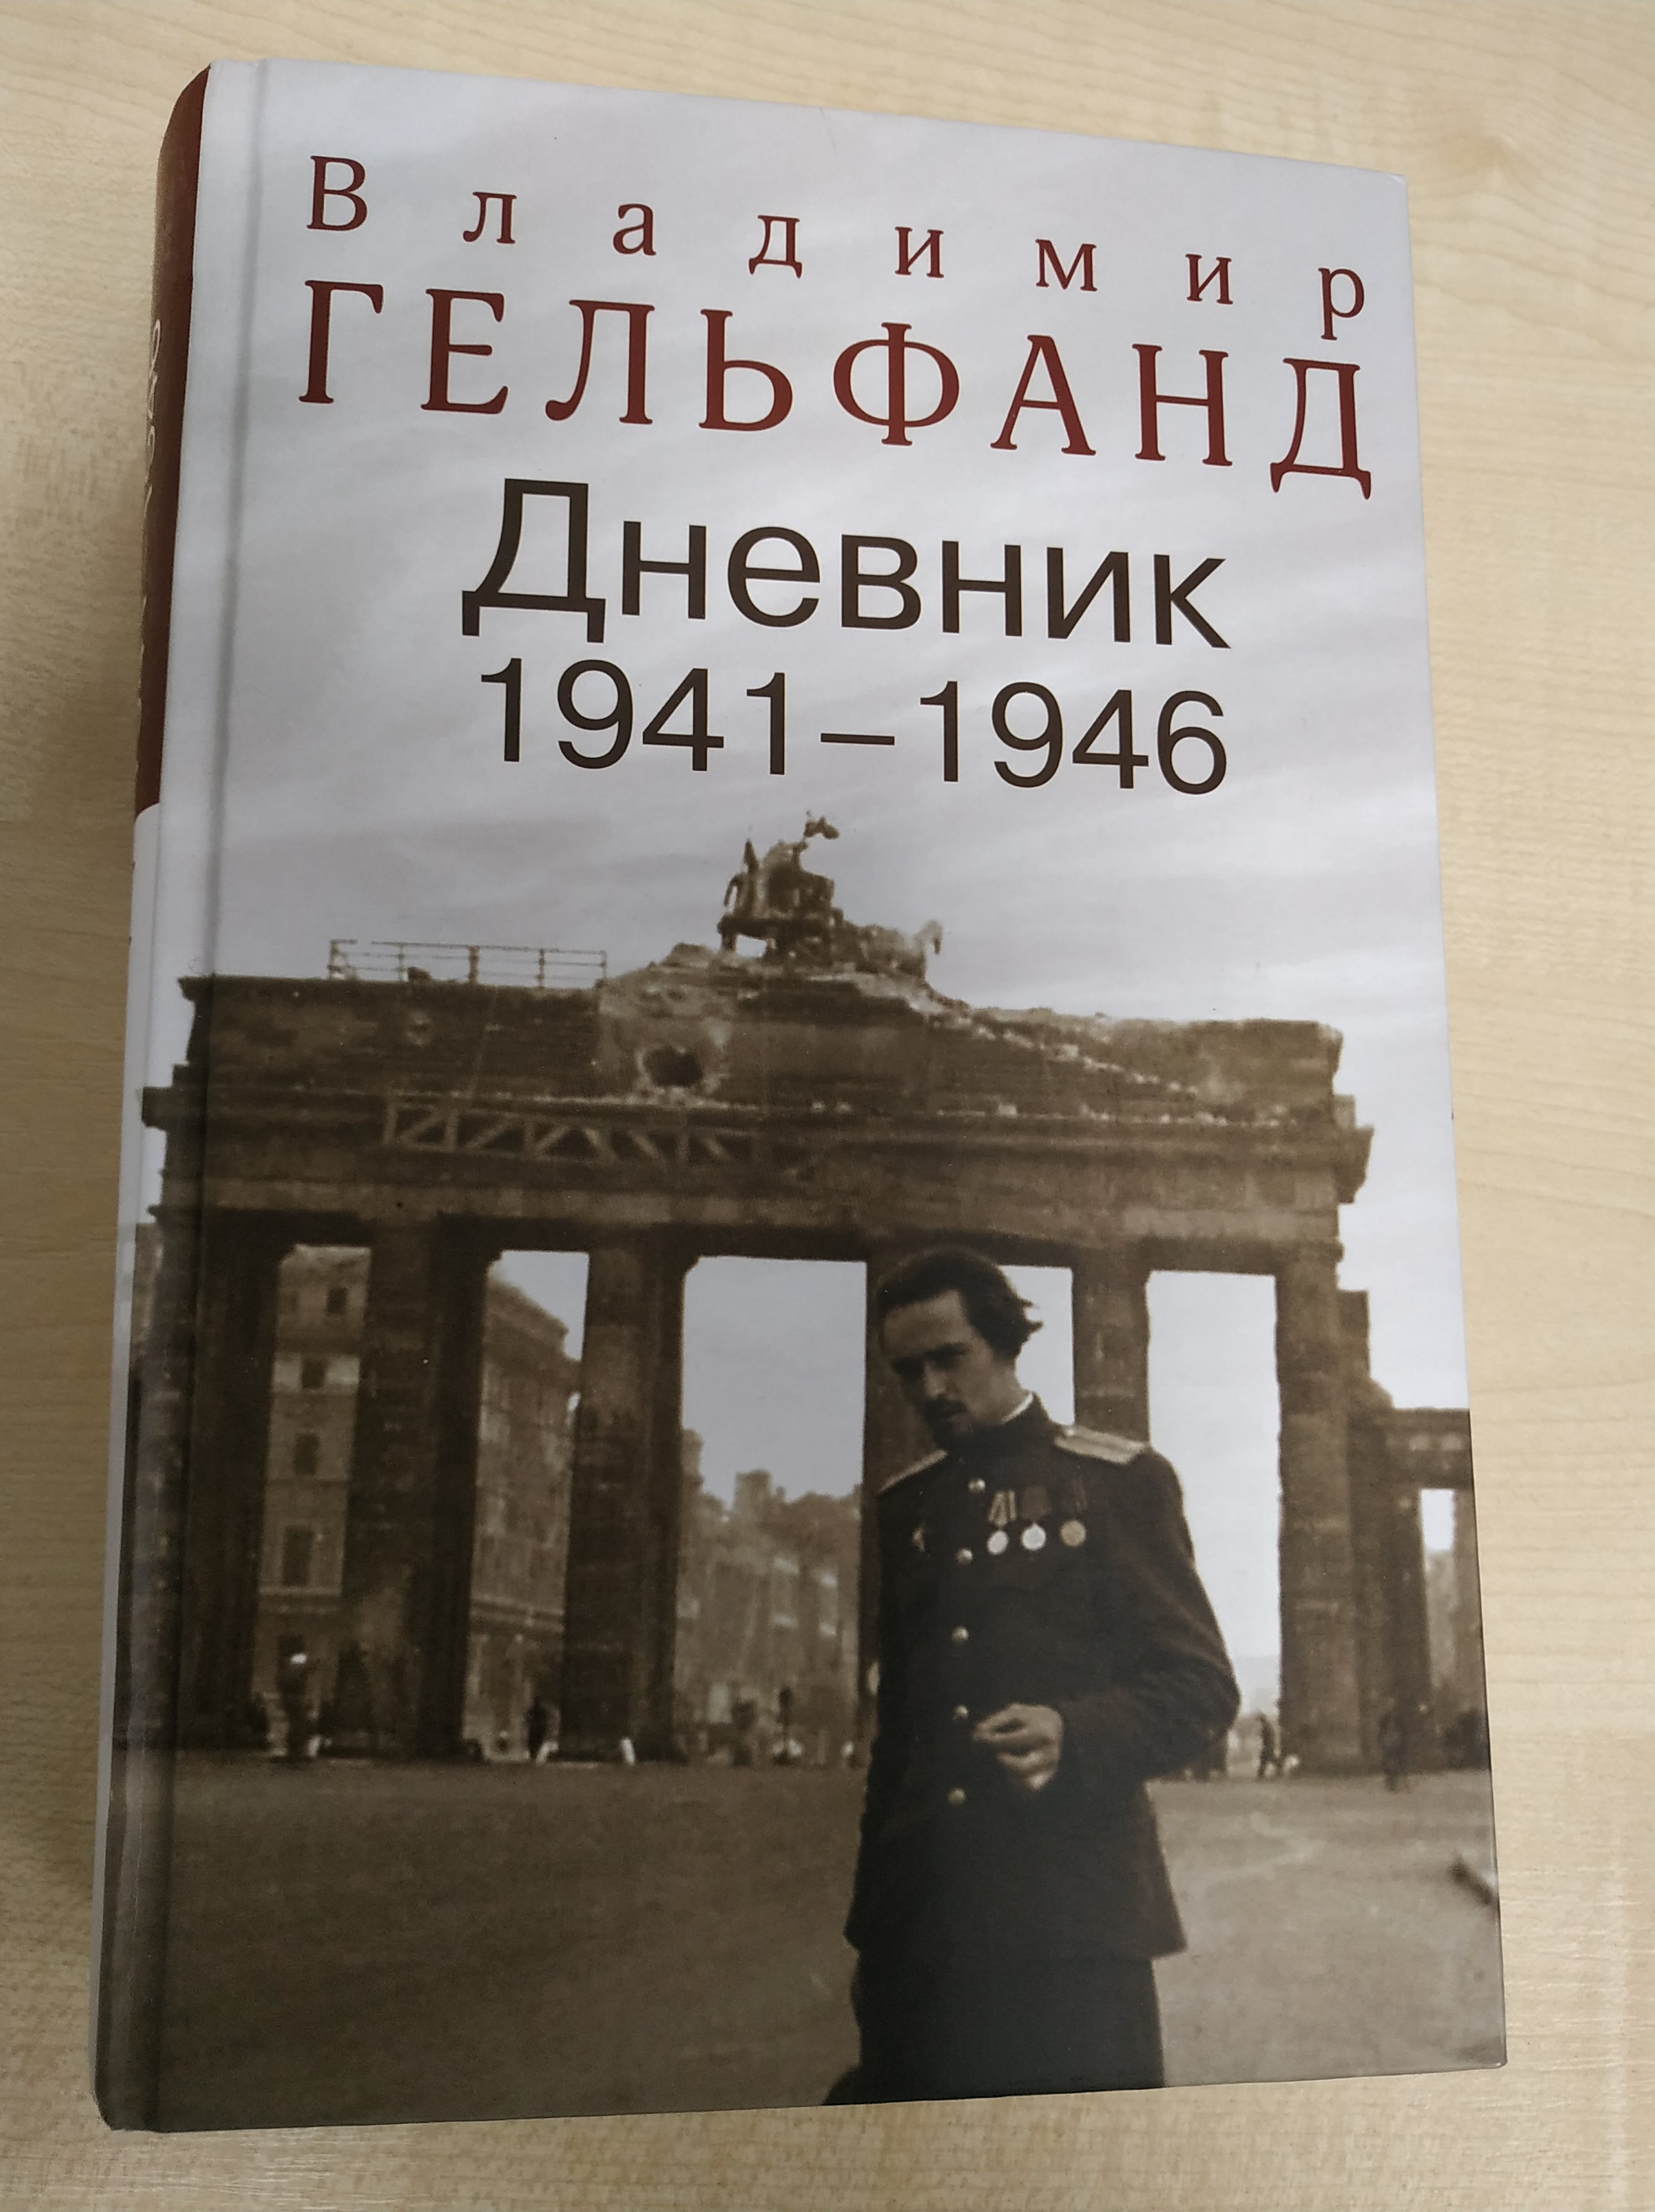 Diary of sergeant, then lieutenant Volodymyr Gelfand. Entries cover the period from May 1941 to October 1946.